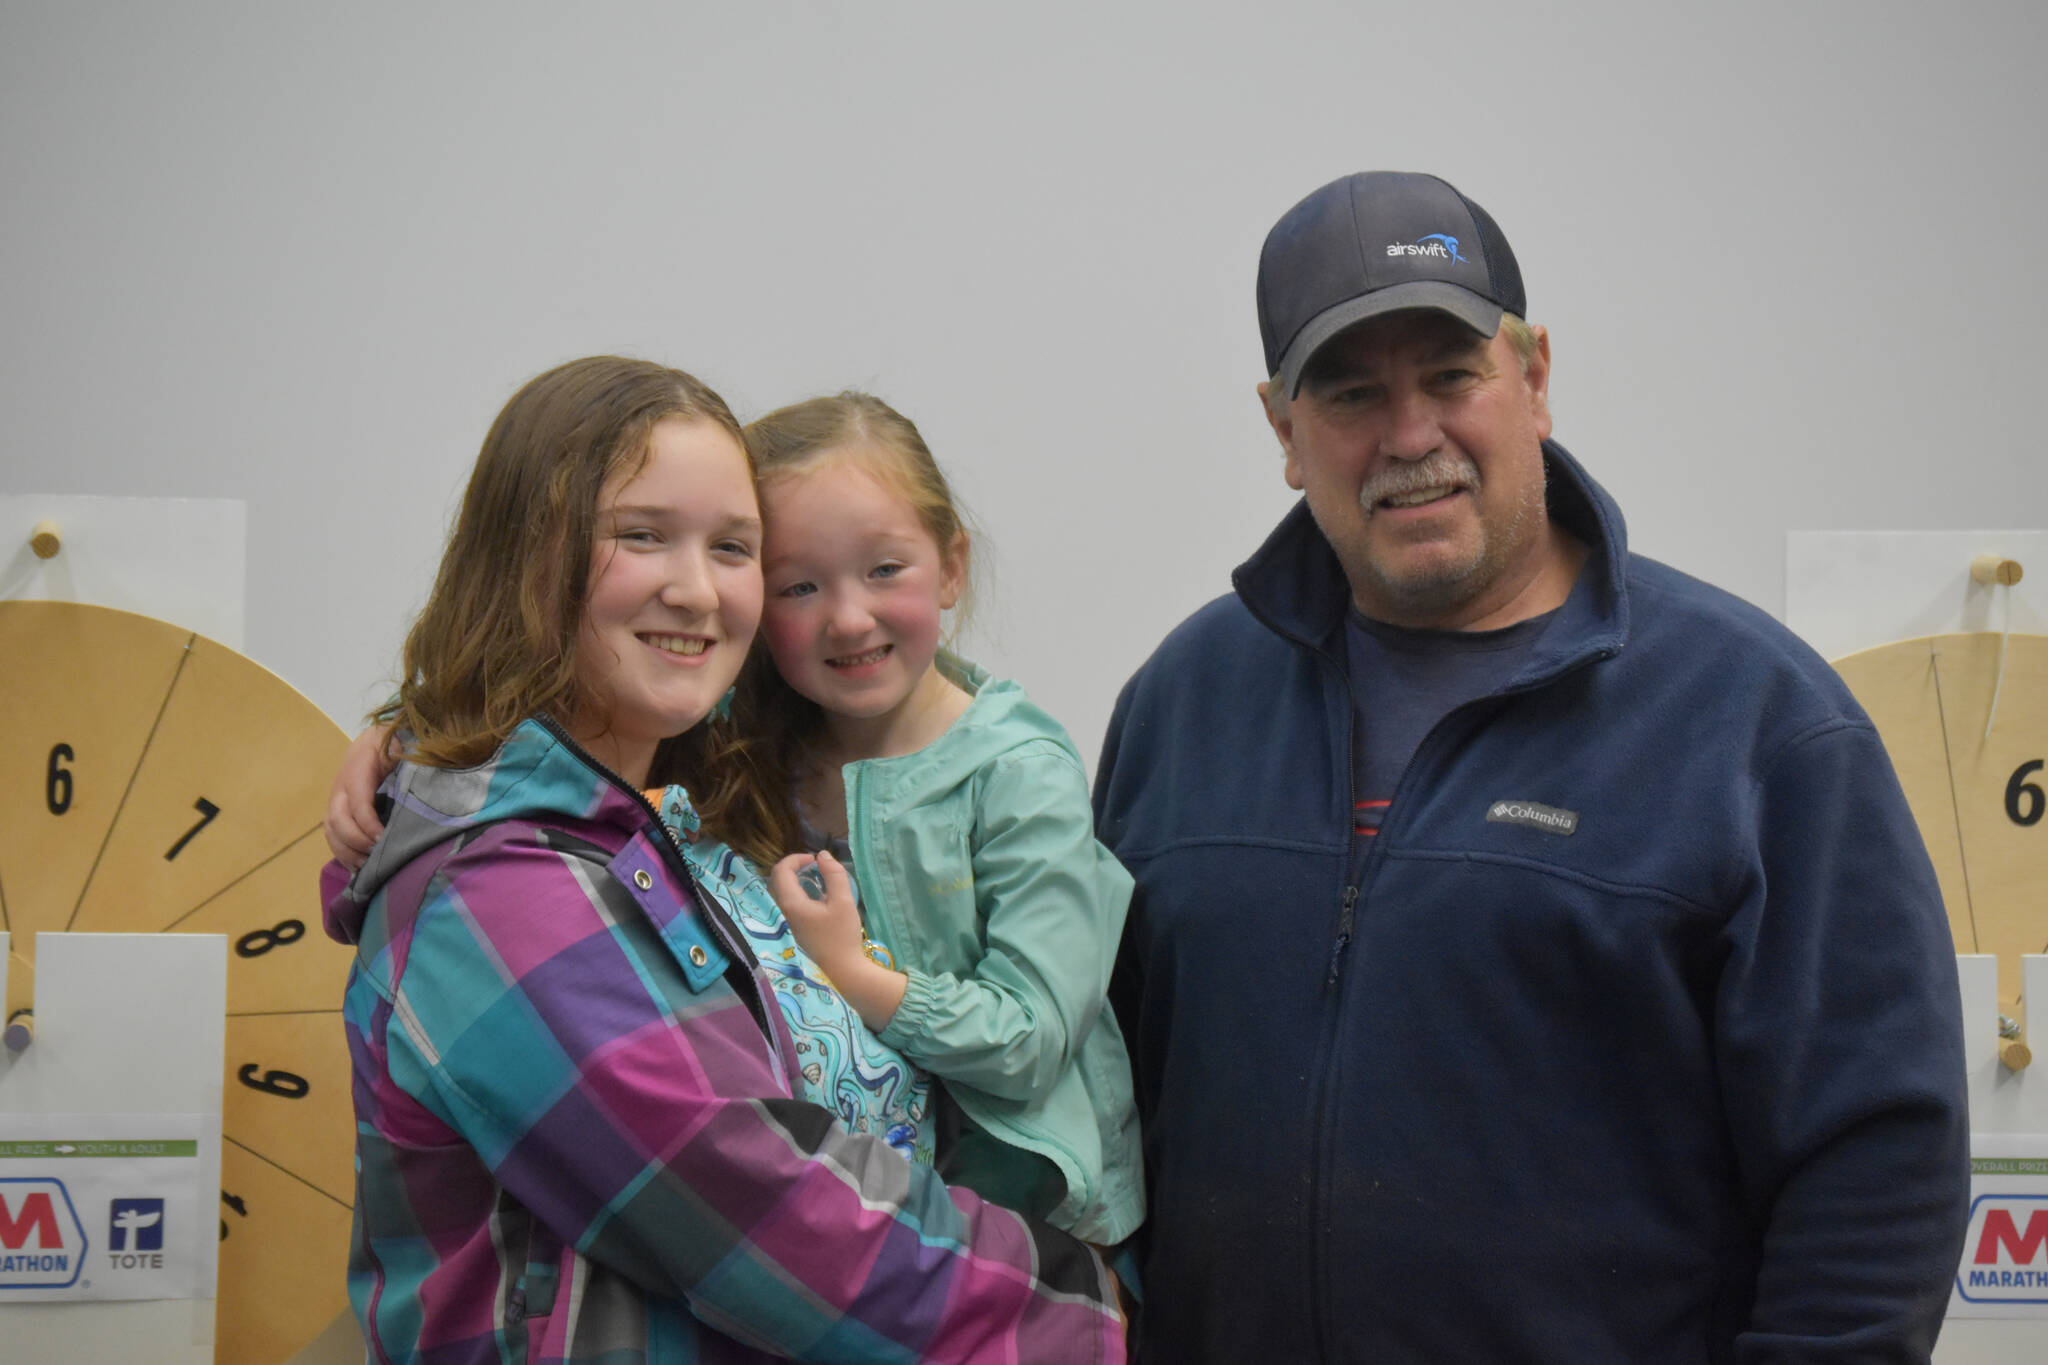 Lily Craig holds her sister, Abigail Craig, who won the youth division of the derby, for photos with Mayor Brian Gabriel on Monday, Sept. 19, 2022, in Kenai. (Jake Dye/Peninsula Clarion)